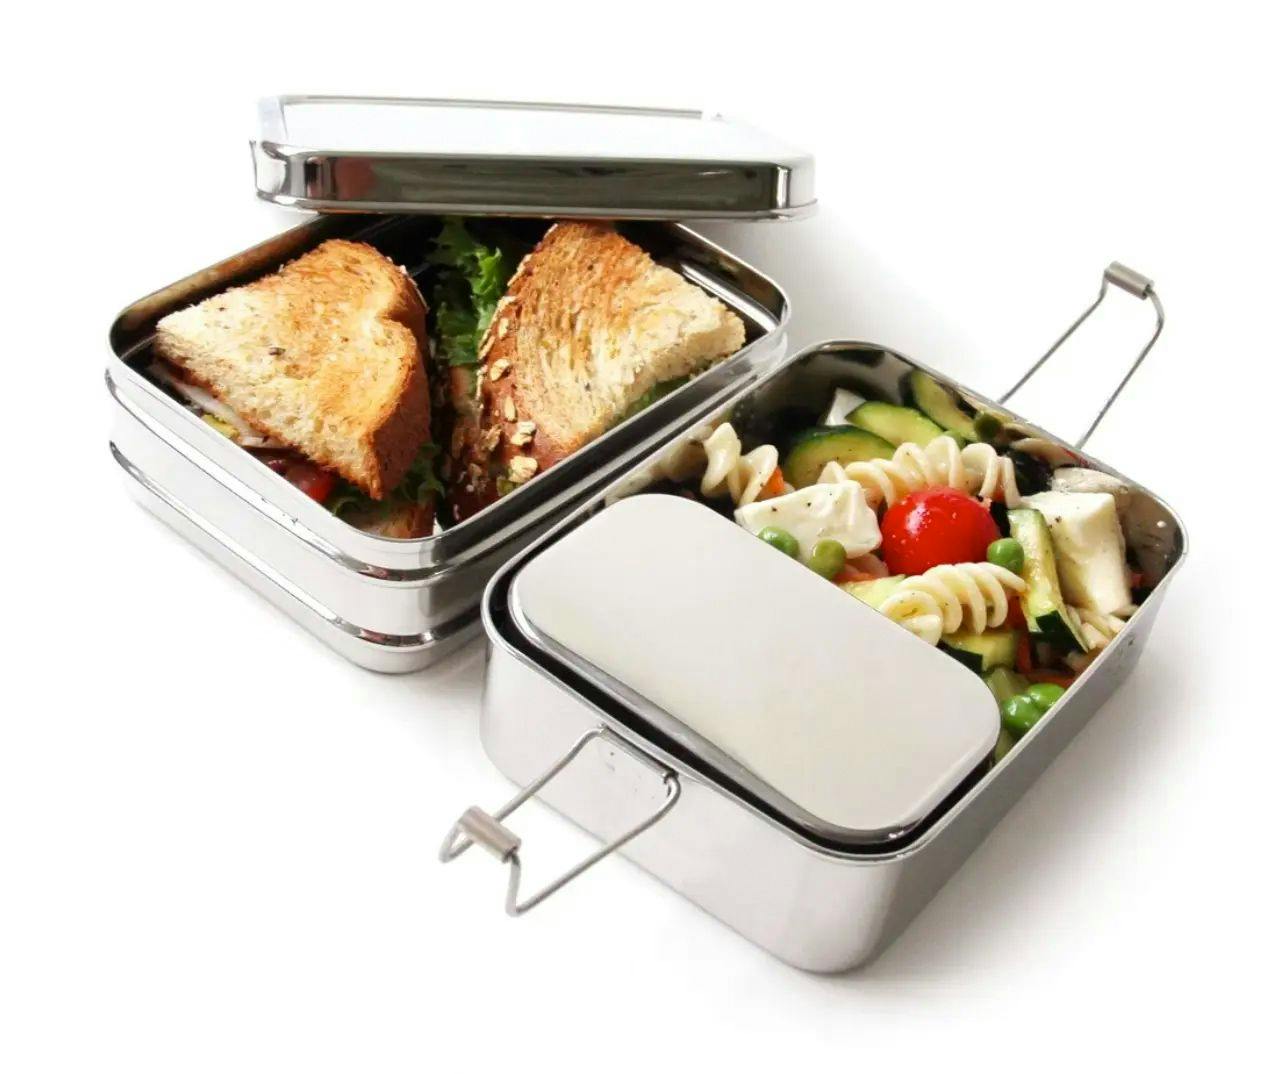 Source: Eco Lunch Boxes